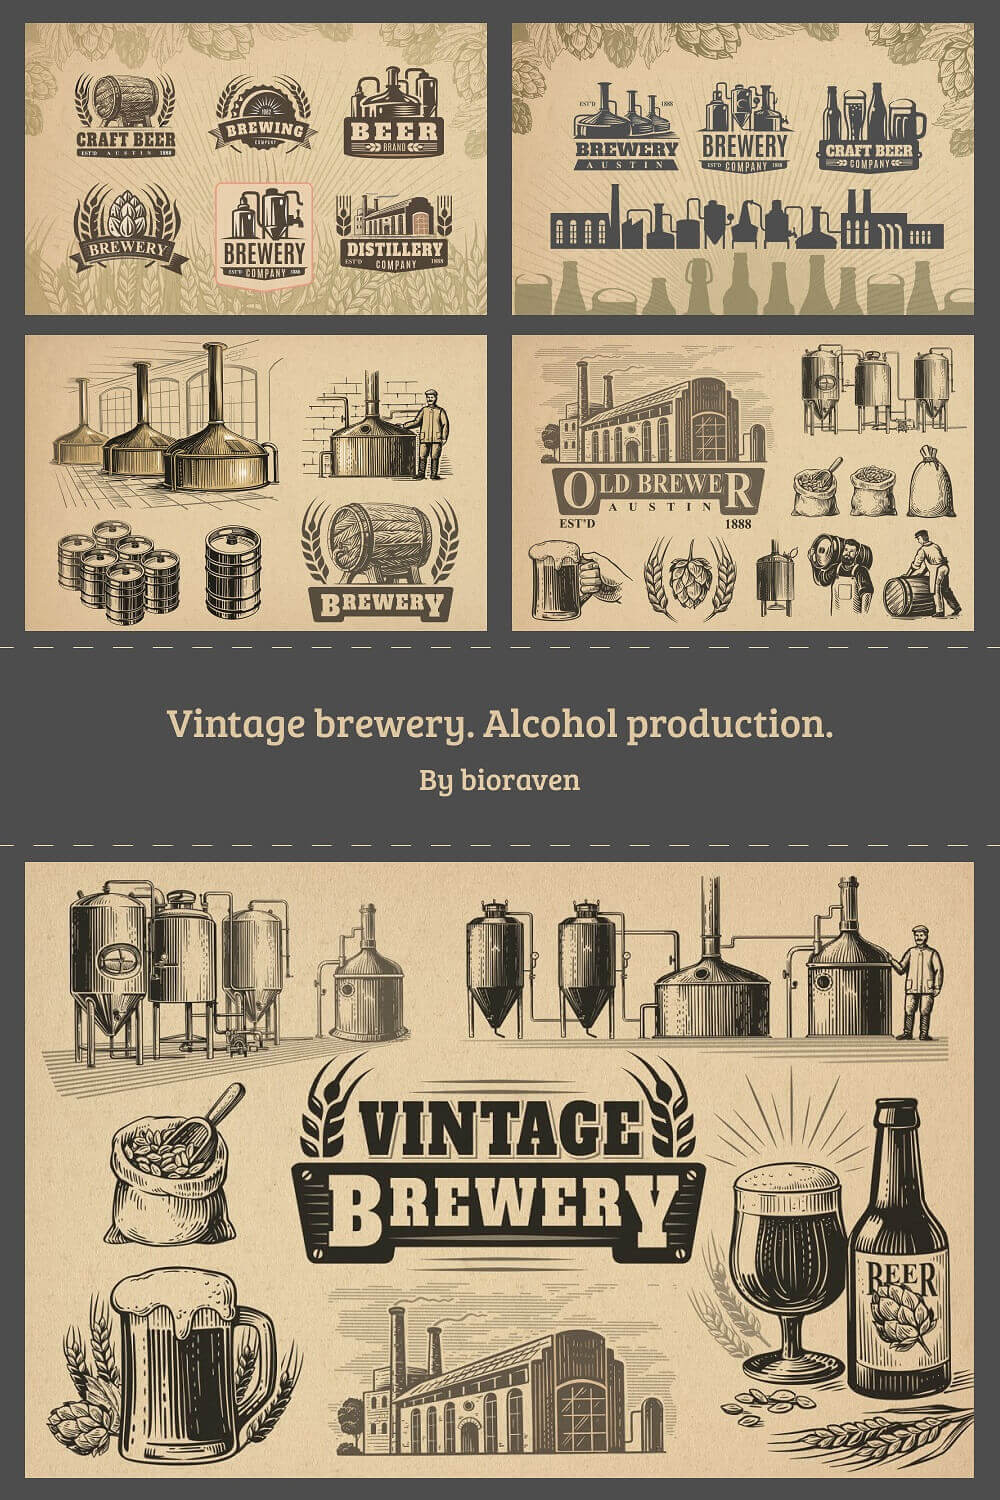 Image of breweries and glasses of beer in vintage style.